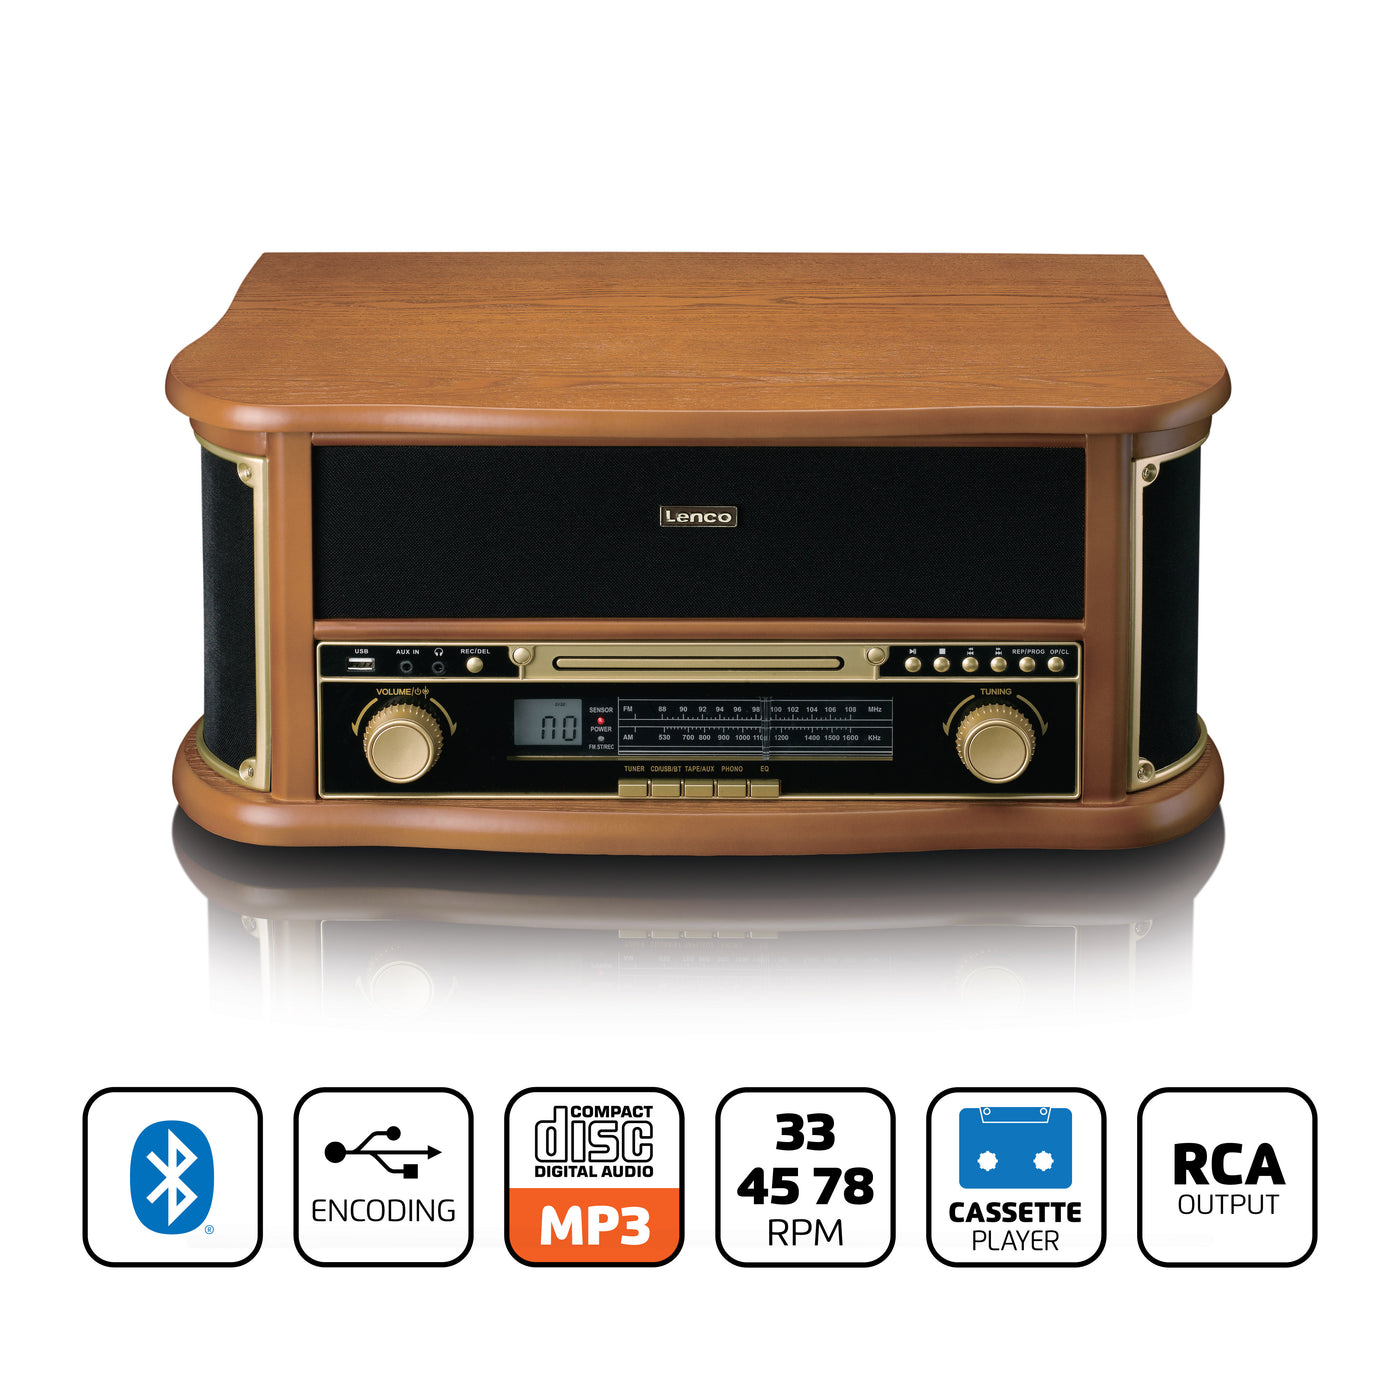 CLASSIC PHONO TCD-2551WD - Wooden retro turntable with Bluetooth®, AM/FM radio, USB encoding, CD player, cassette player, and built-in speakers - Wood